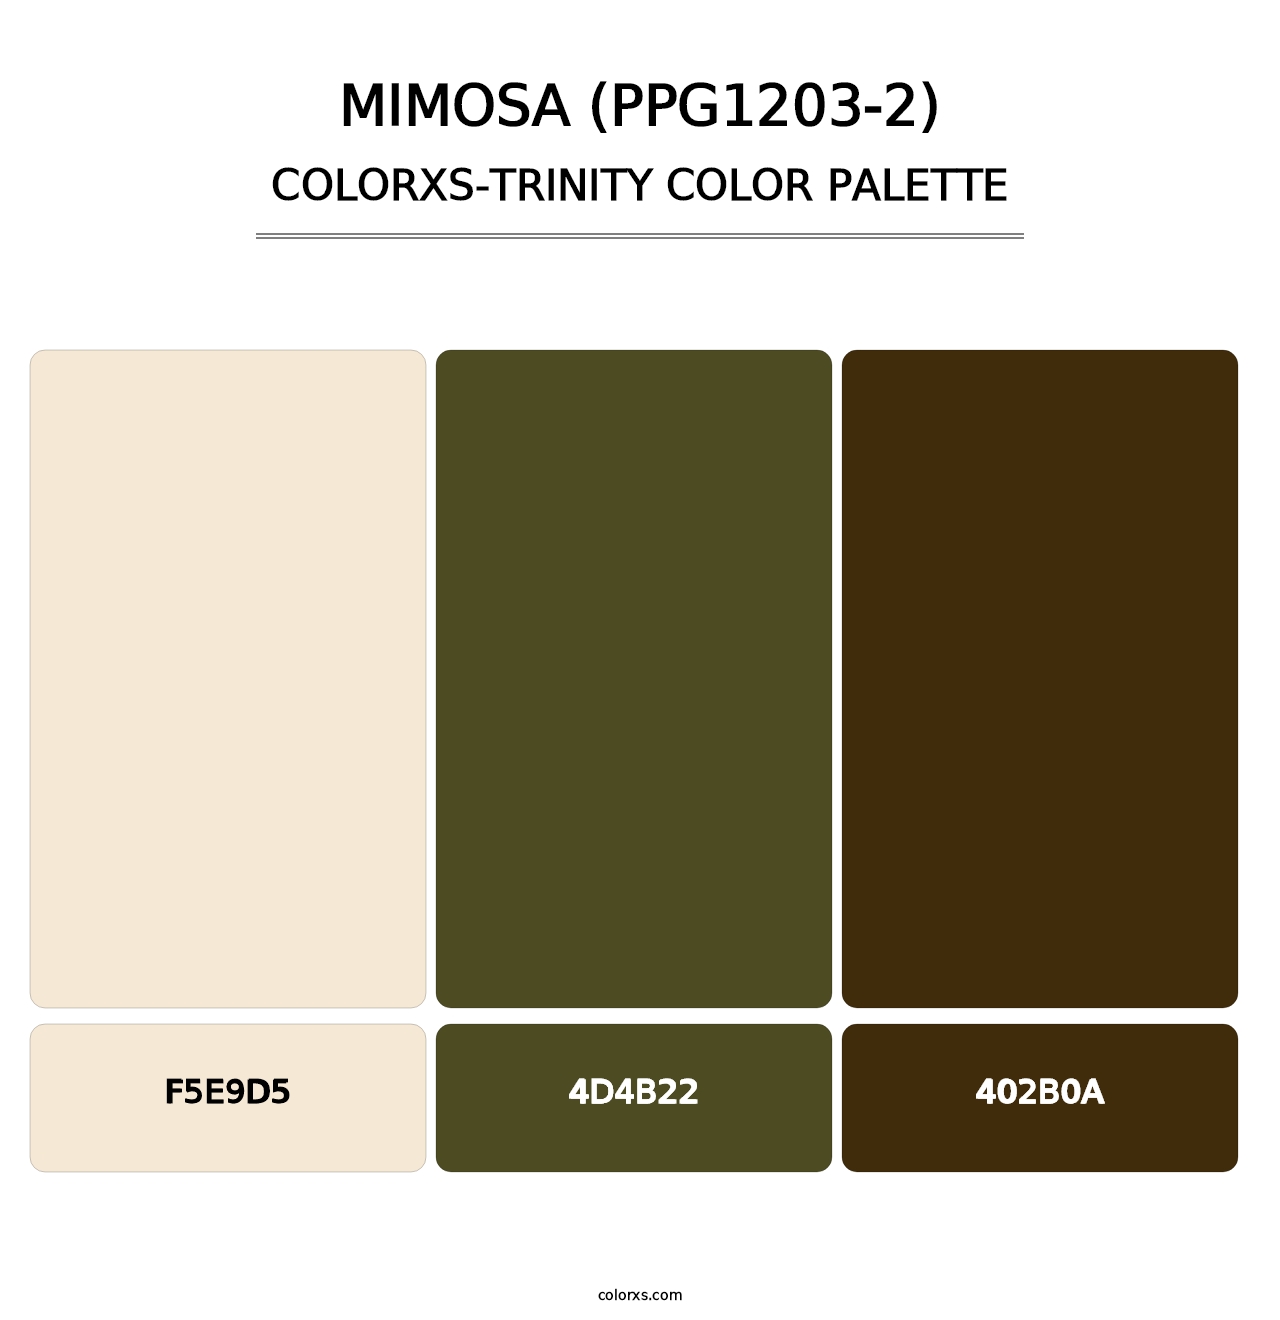 Mimosa (PPG1203-2) - Colorxs Trinity Palette